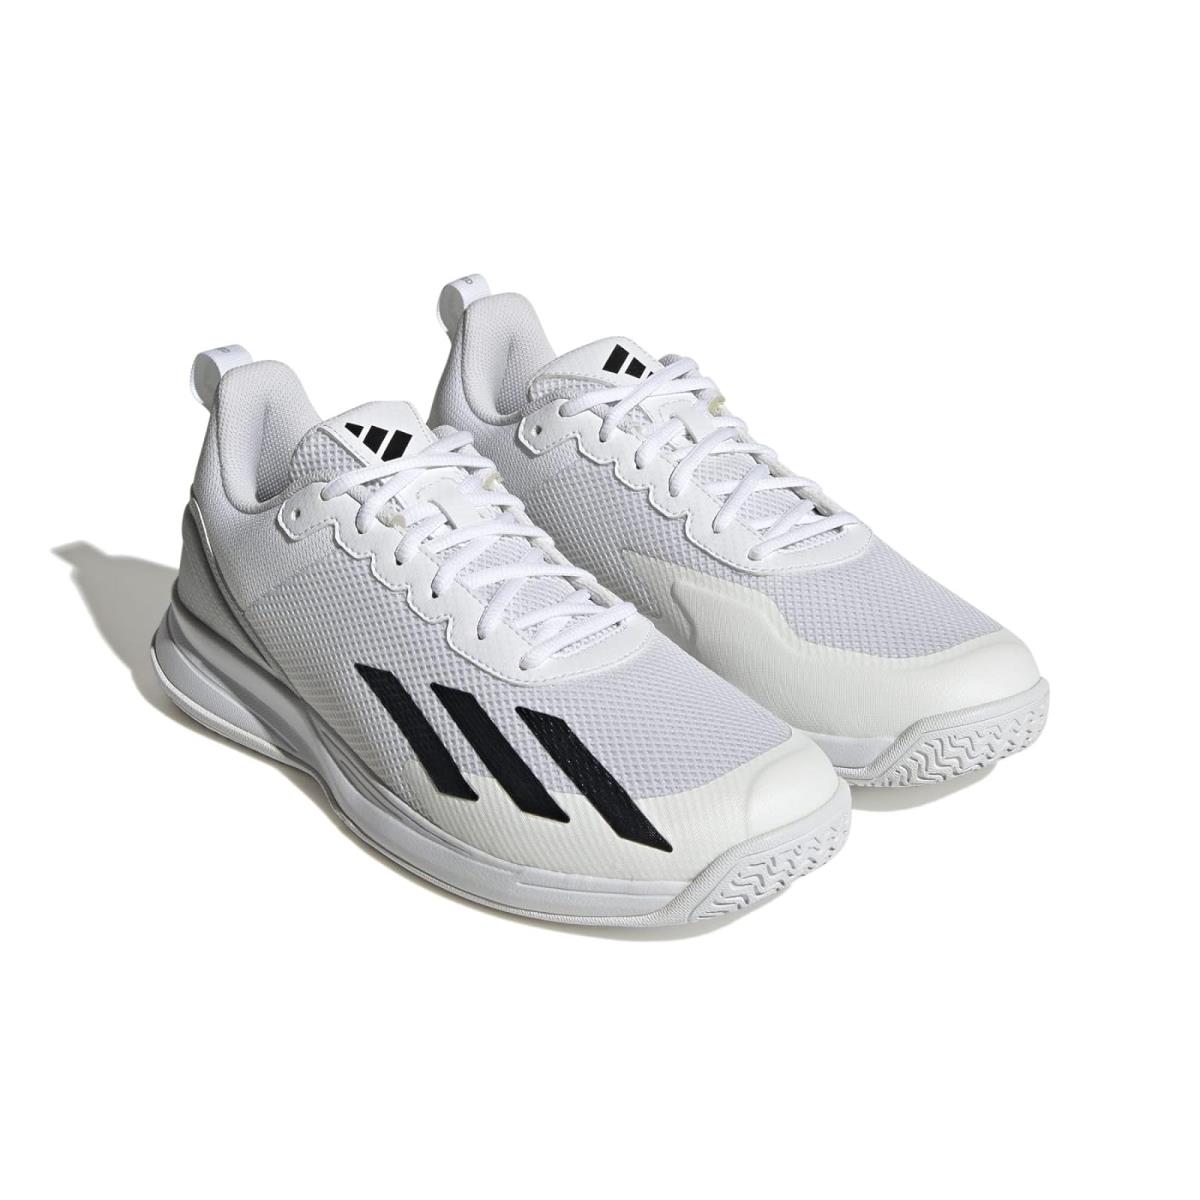 Man`s Sneakers Athletic Shoes Adidas Courtflash Speed Footwear White/Core Black/Matte Silver